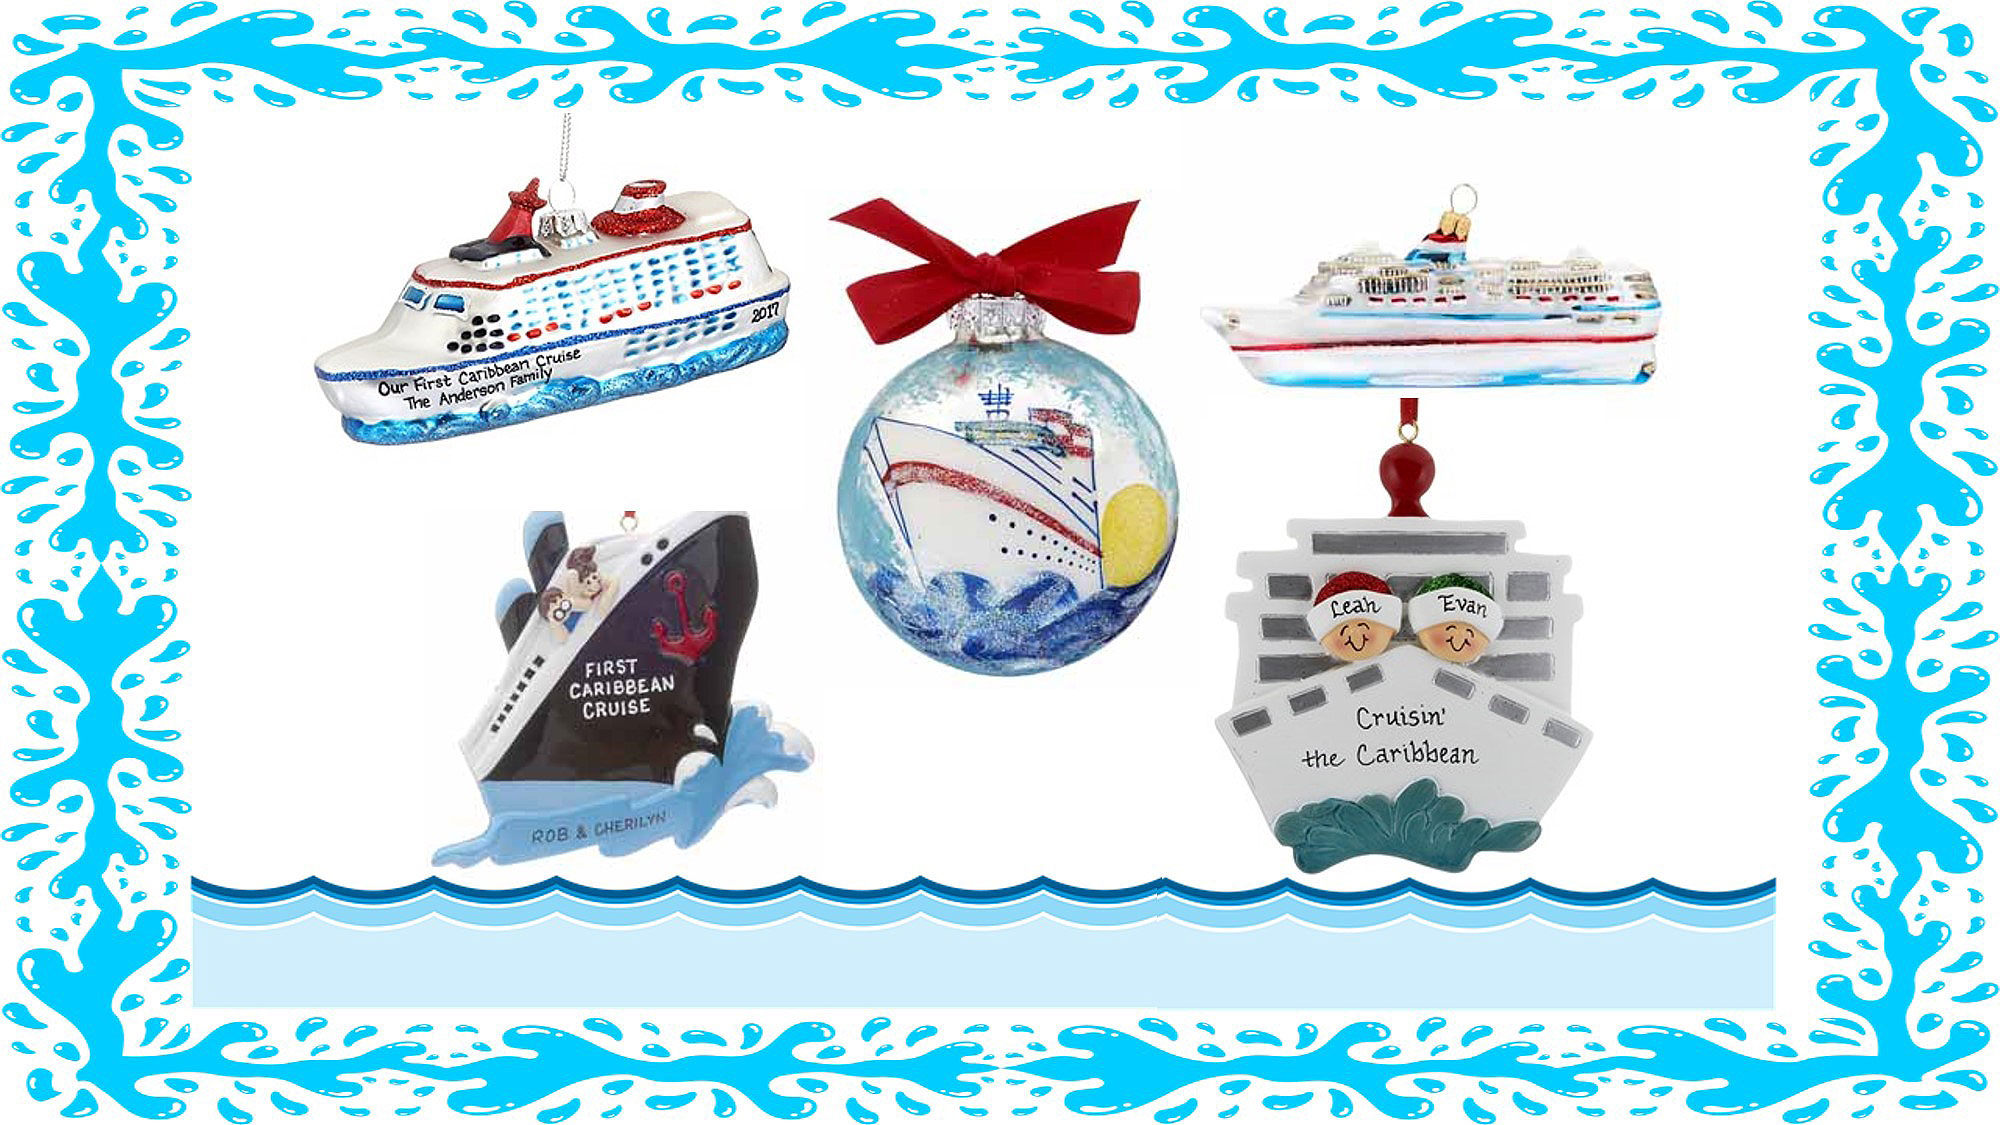 A variety of personalized cruise ship ornaments available at OrnamentShop.com.